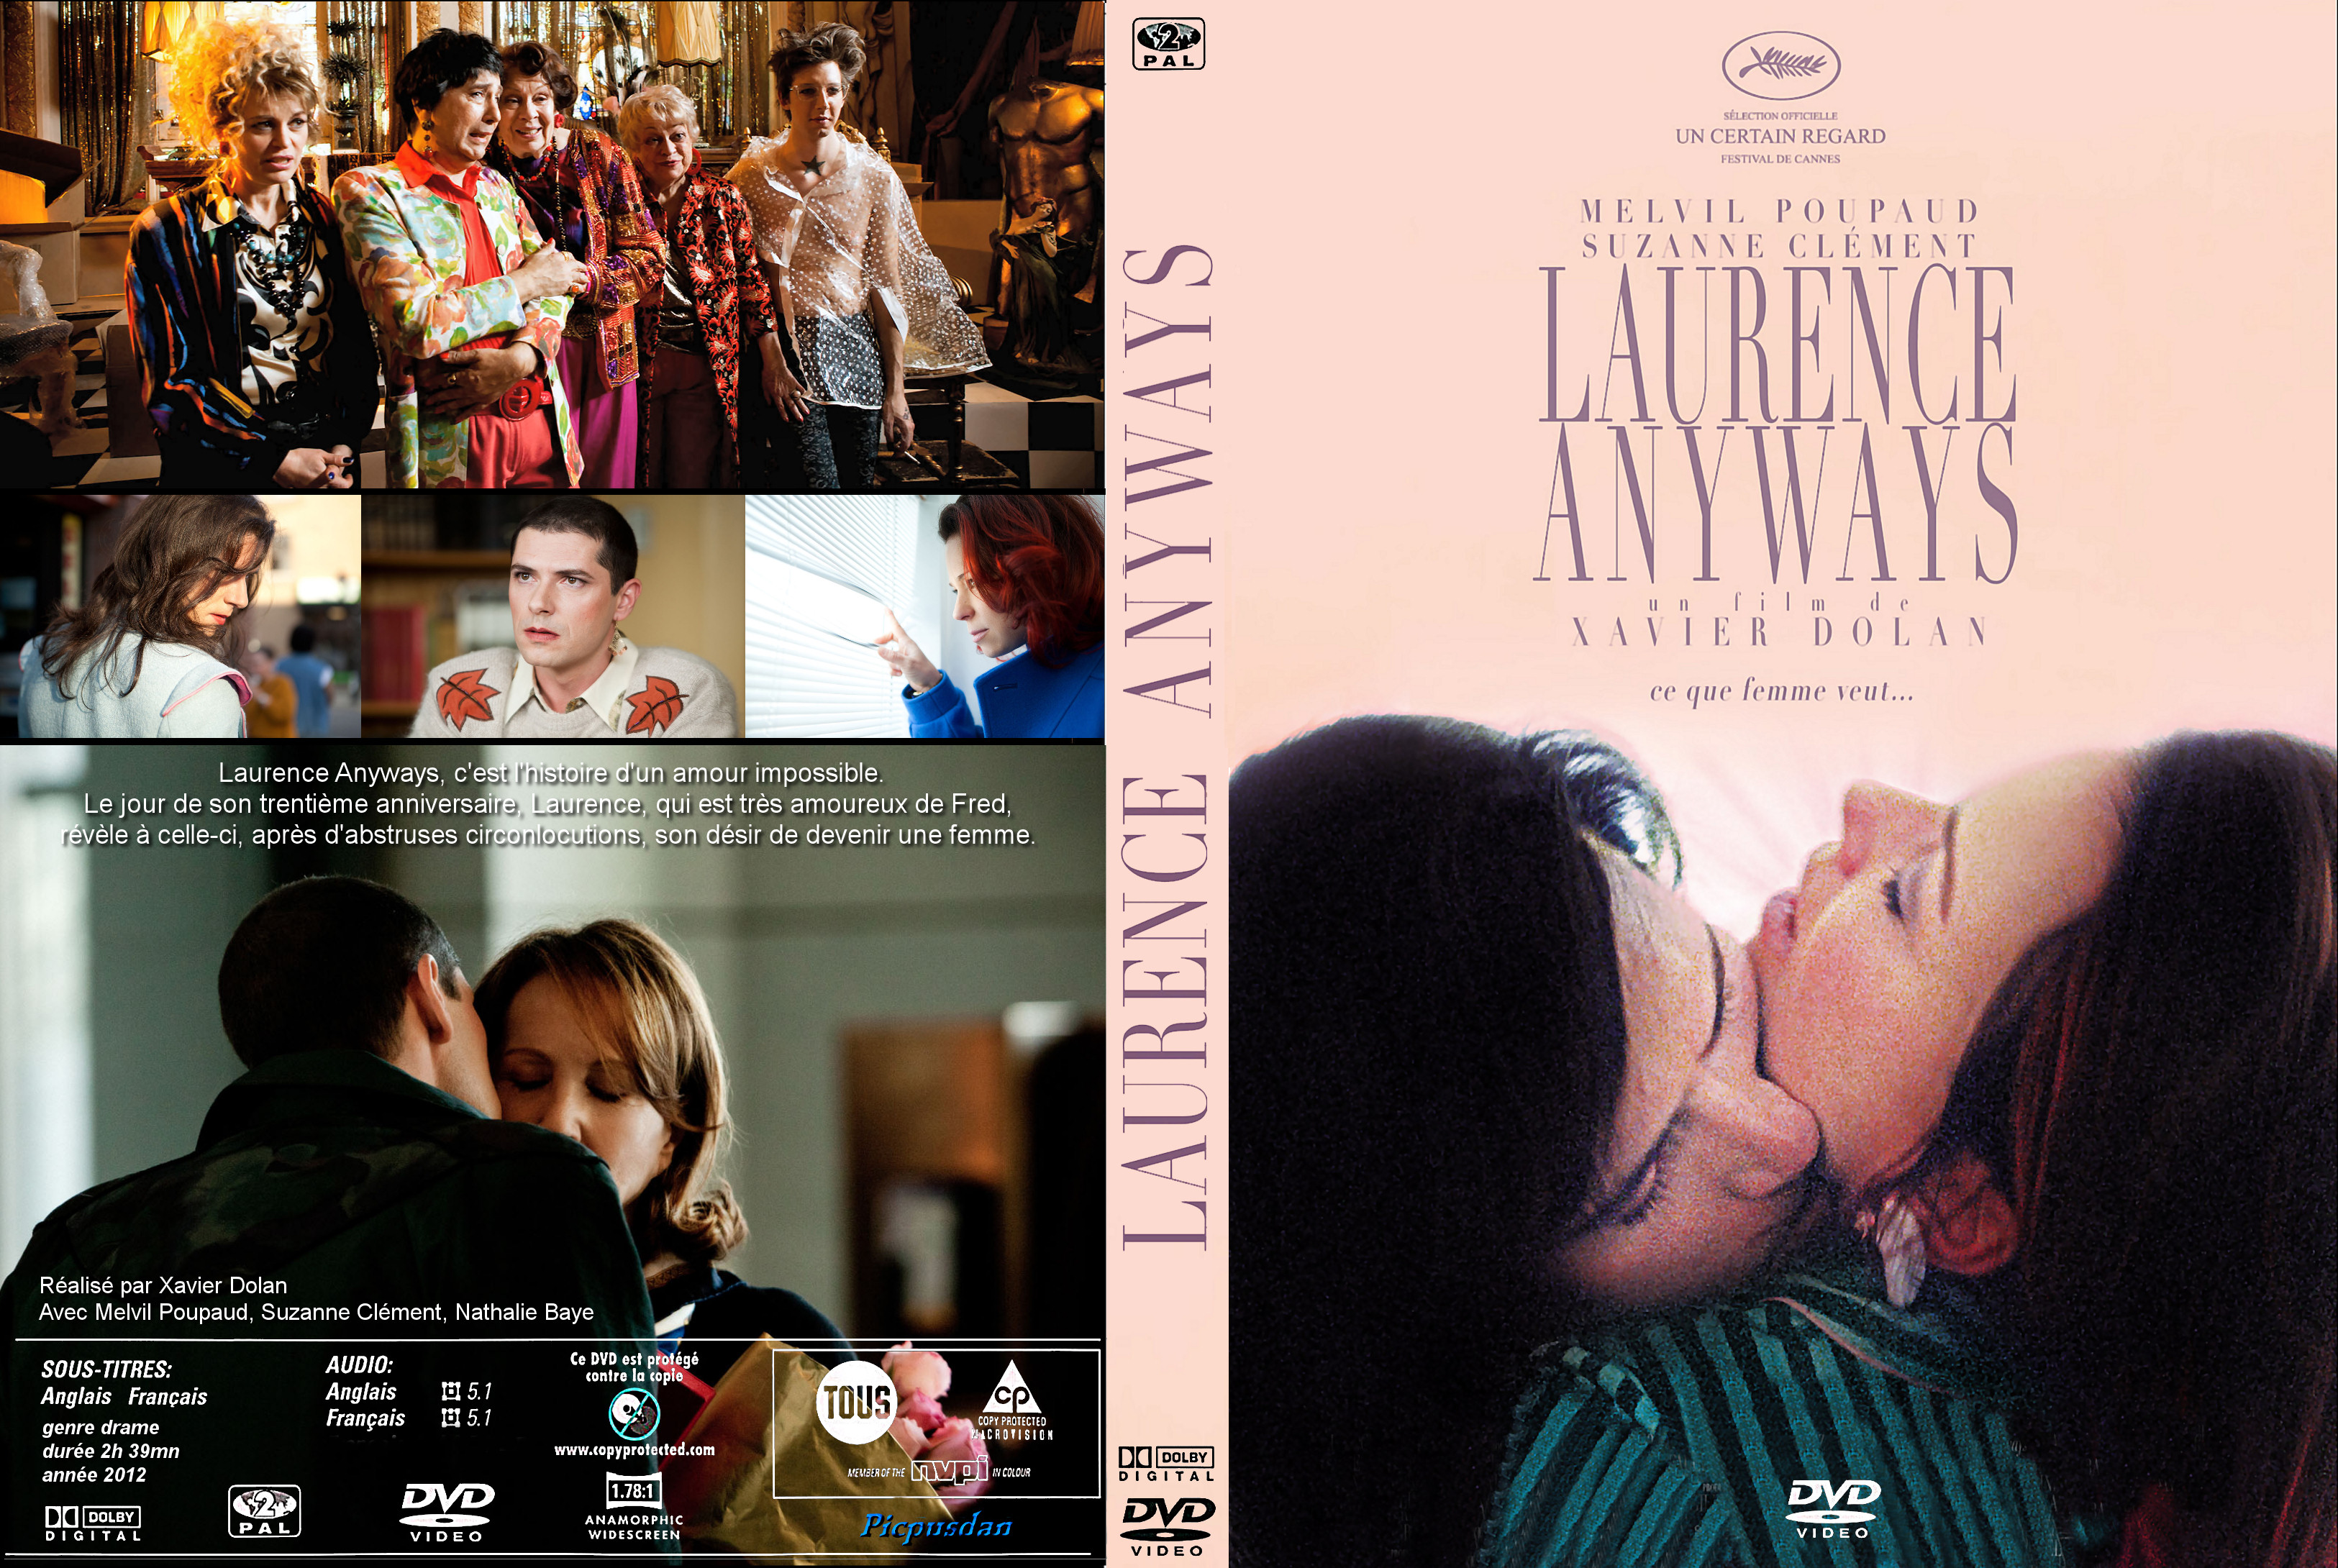 Jaquette DVD Laurence Anyways custom